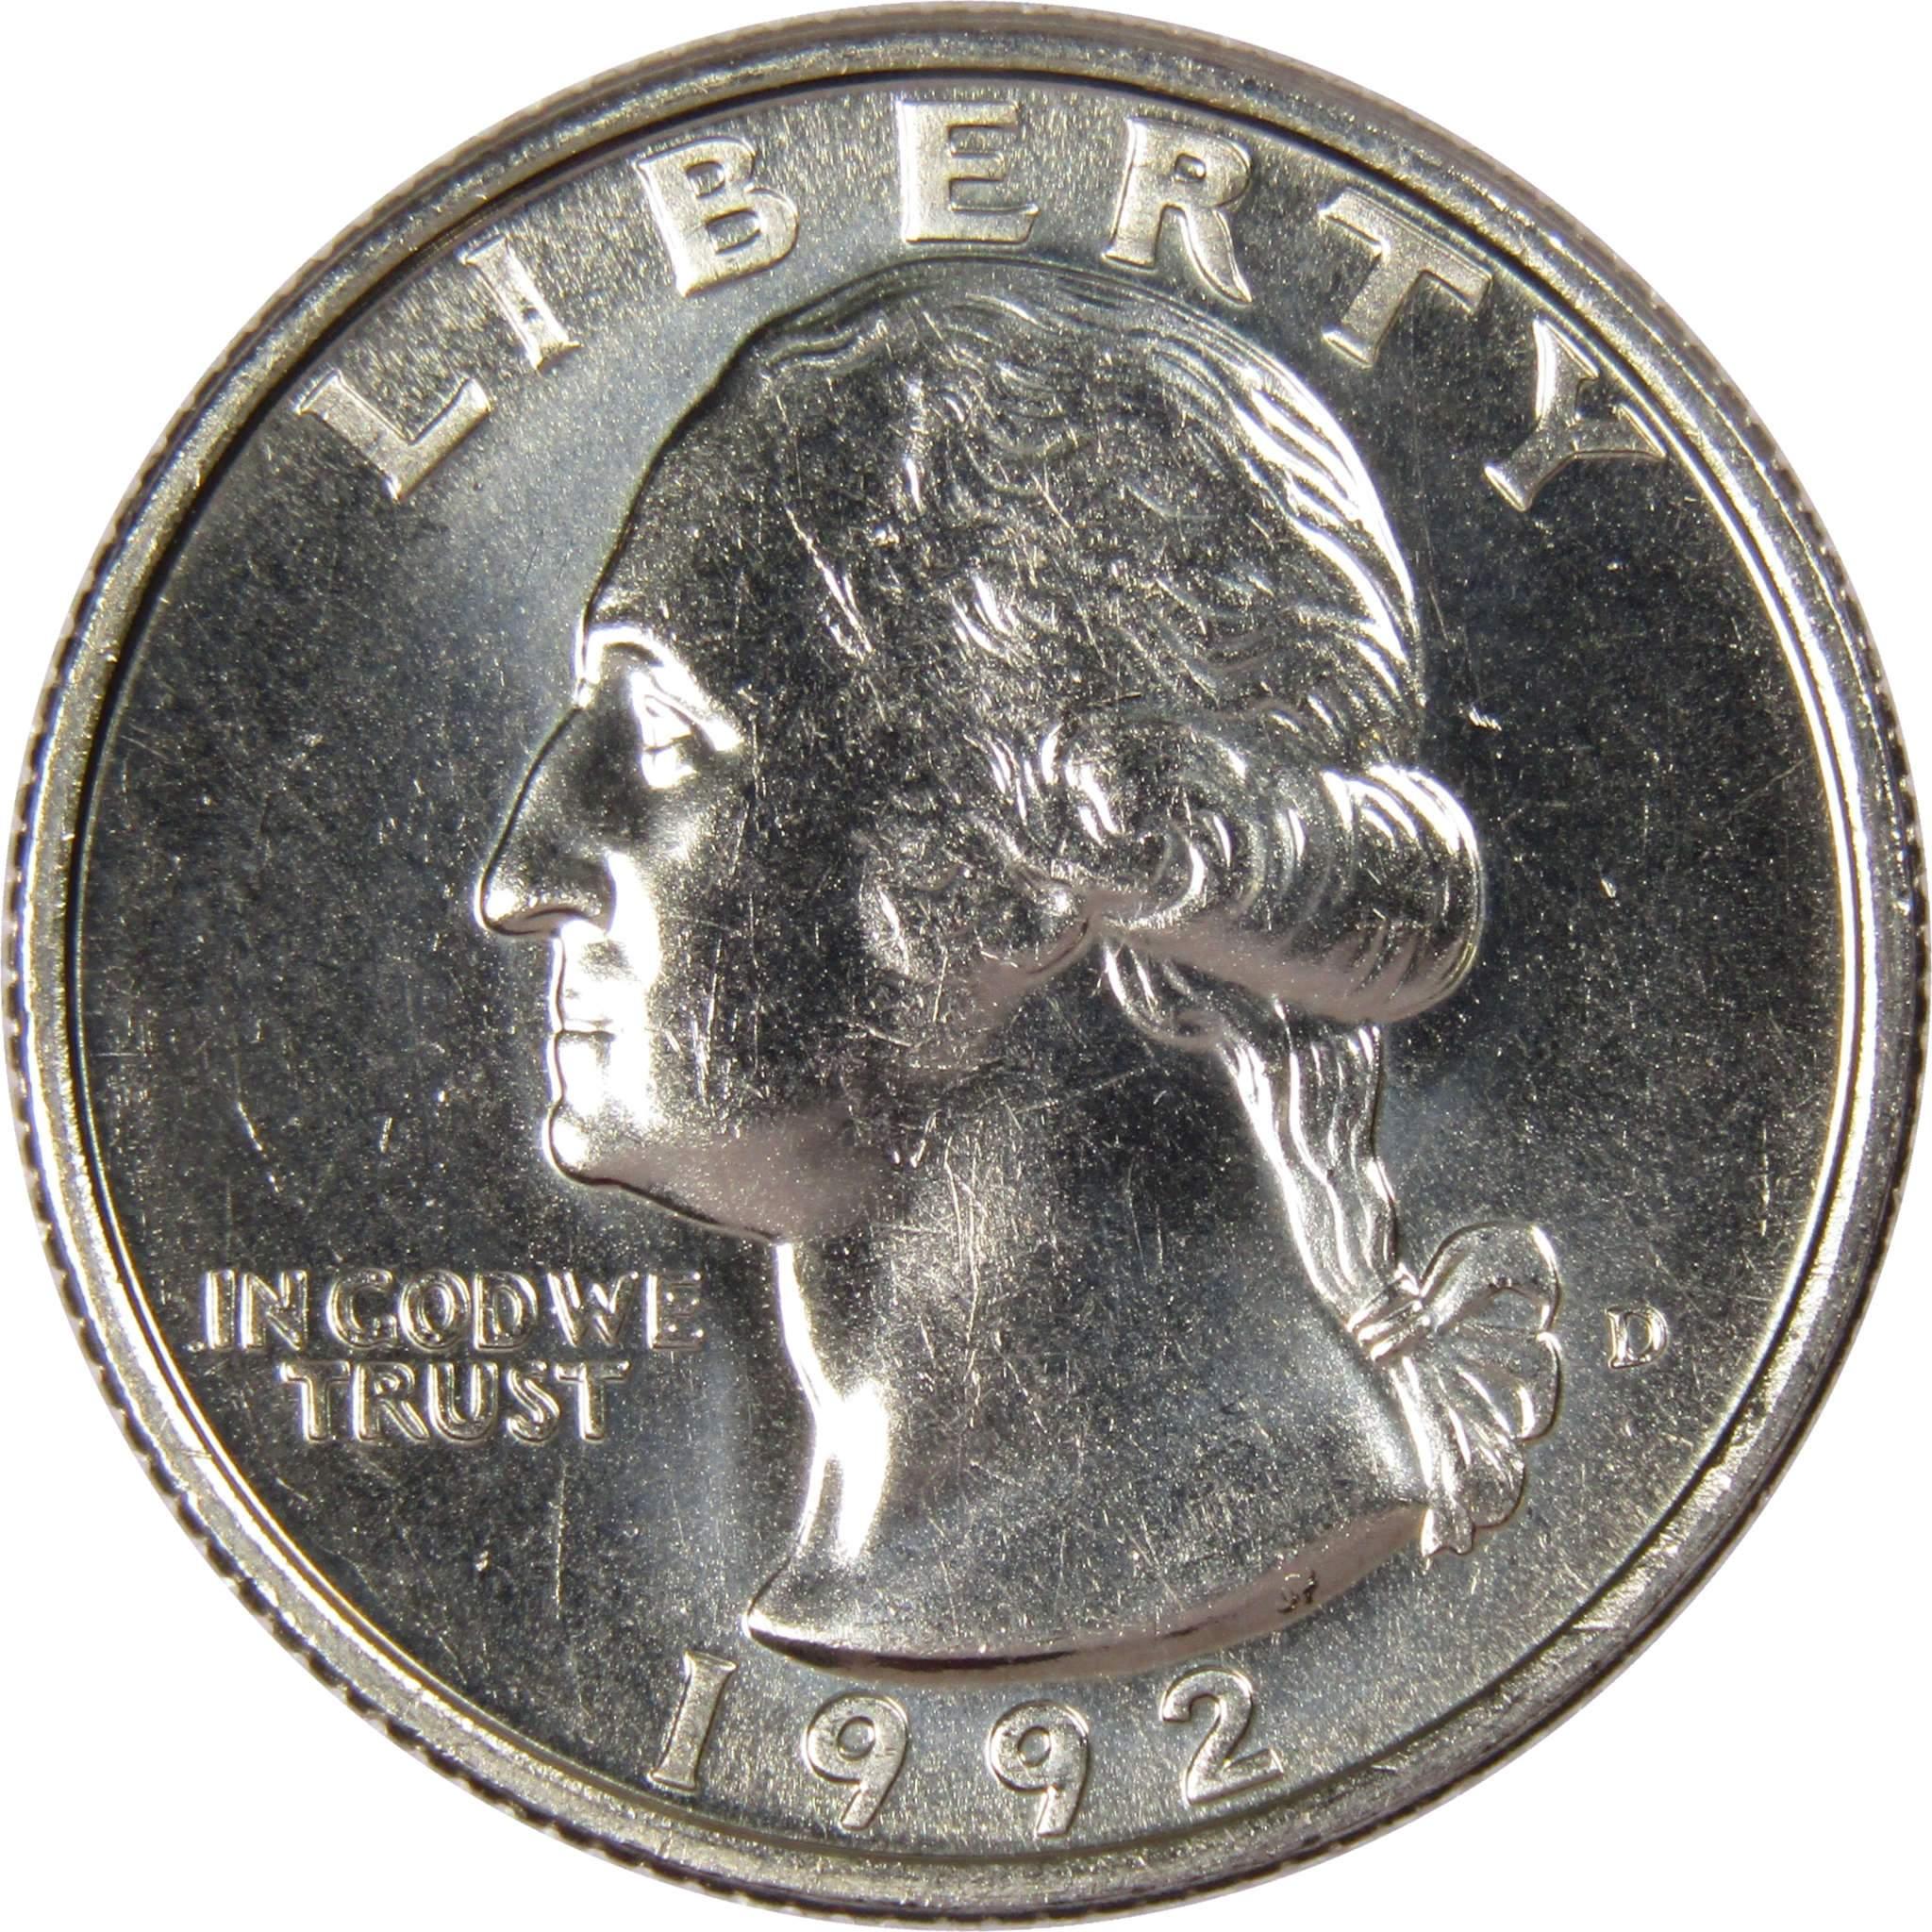 1992 D Washington Quarter BU Uncirculated Mint State 25c US Coin Collectible